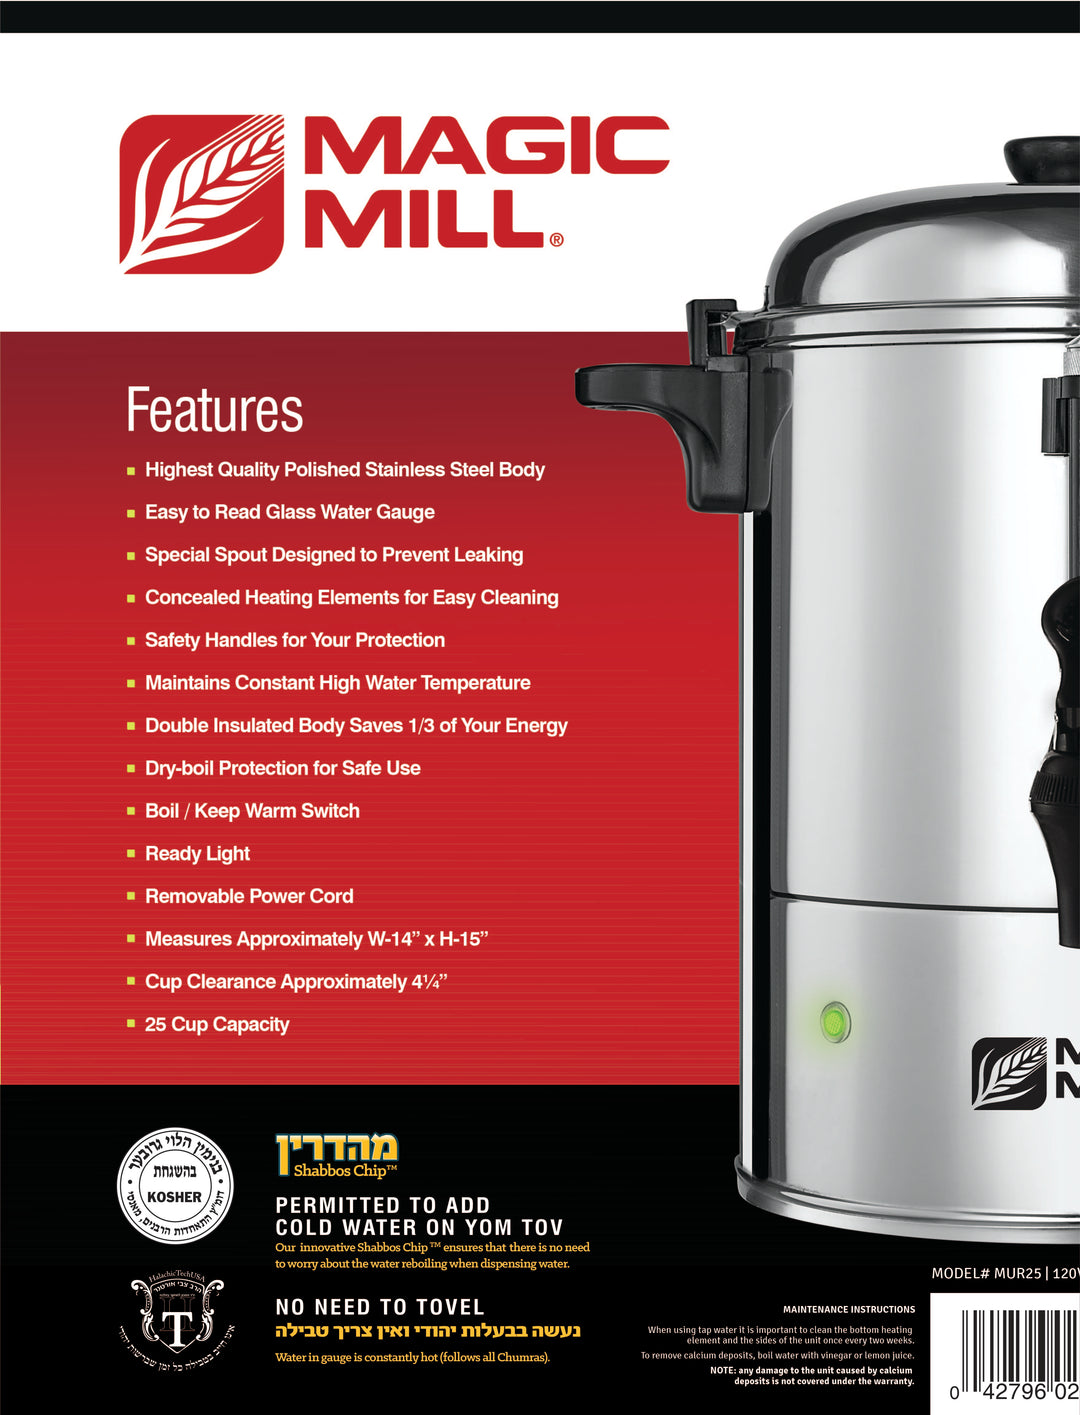 MAGIC MILL DOUBLE INSULATED HOT WATER URN 25 CUP MODEL# MUR25